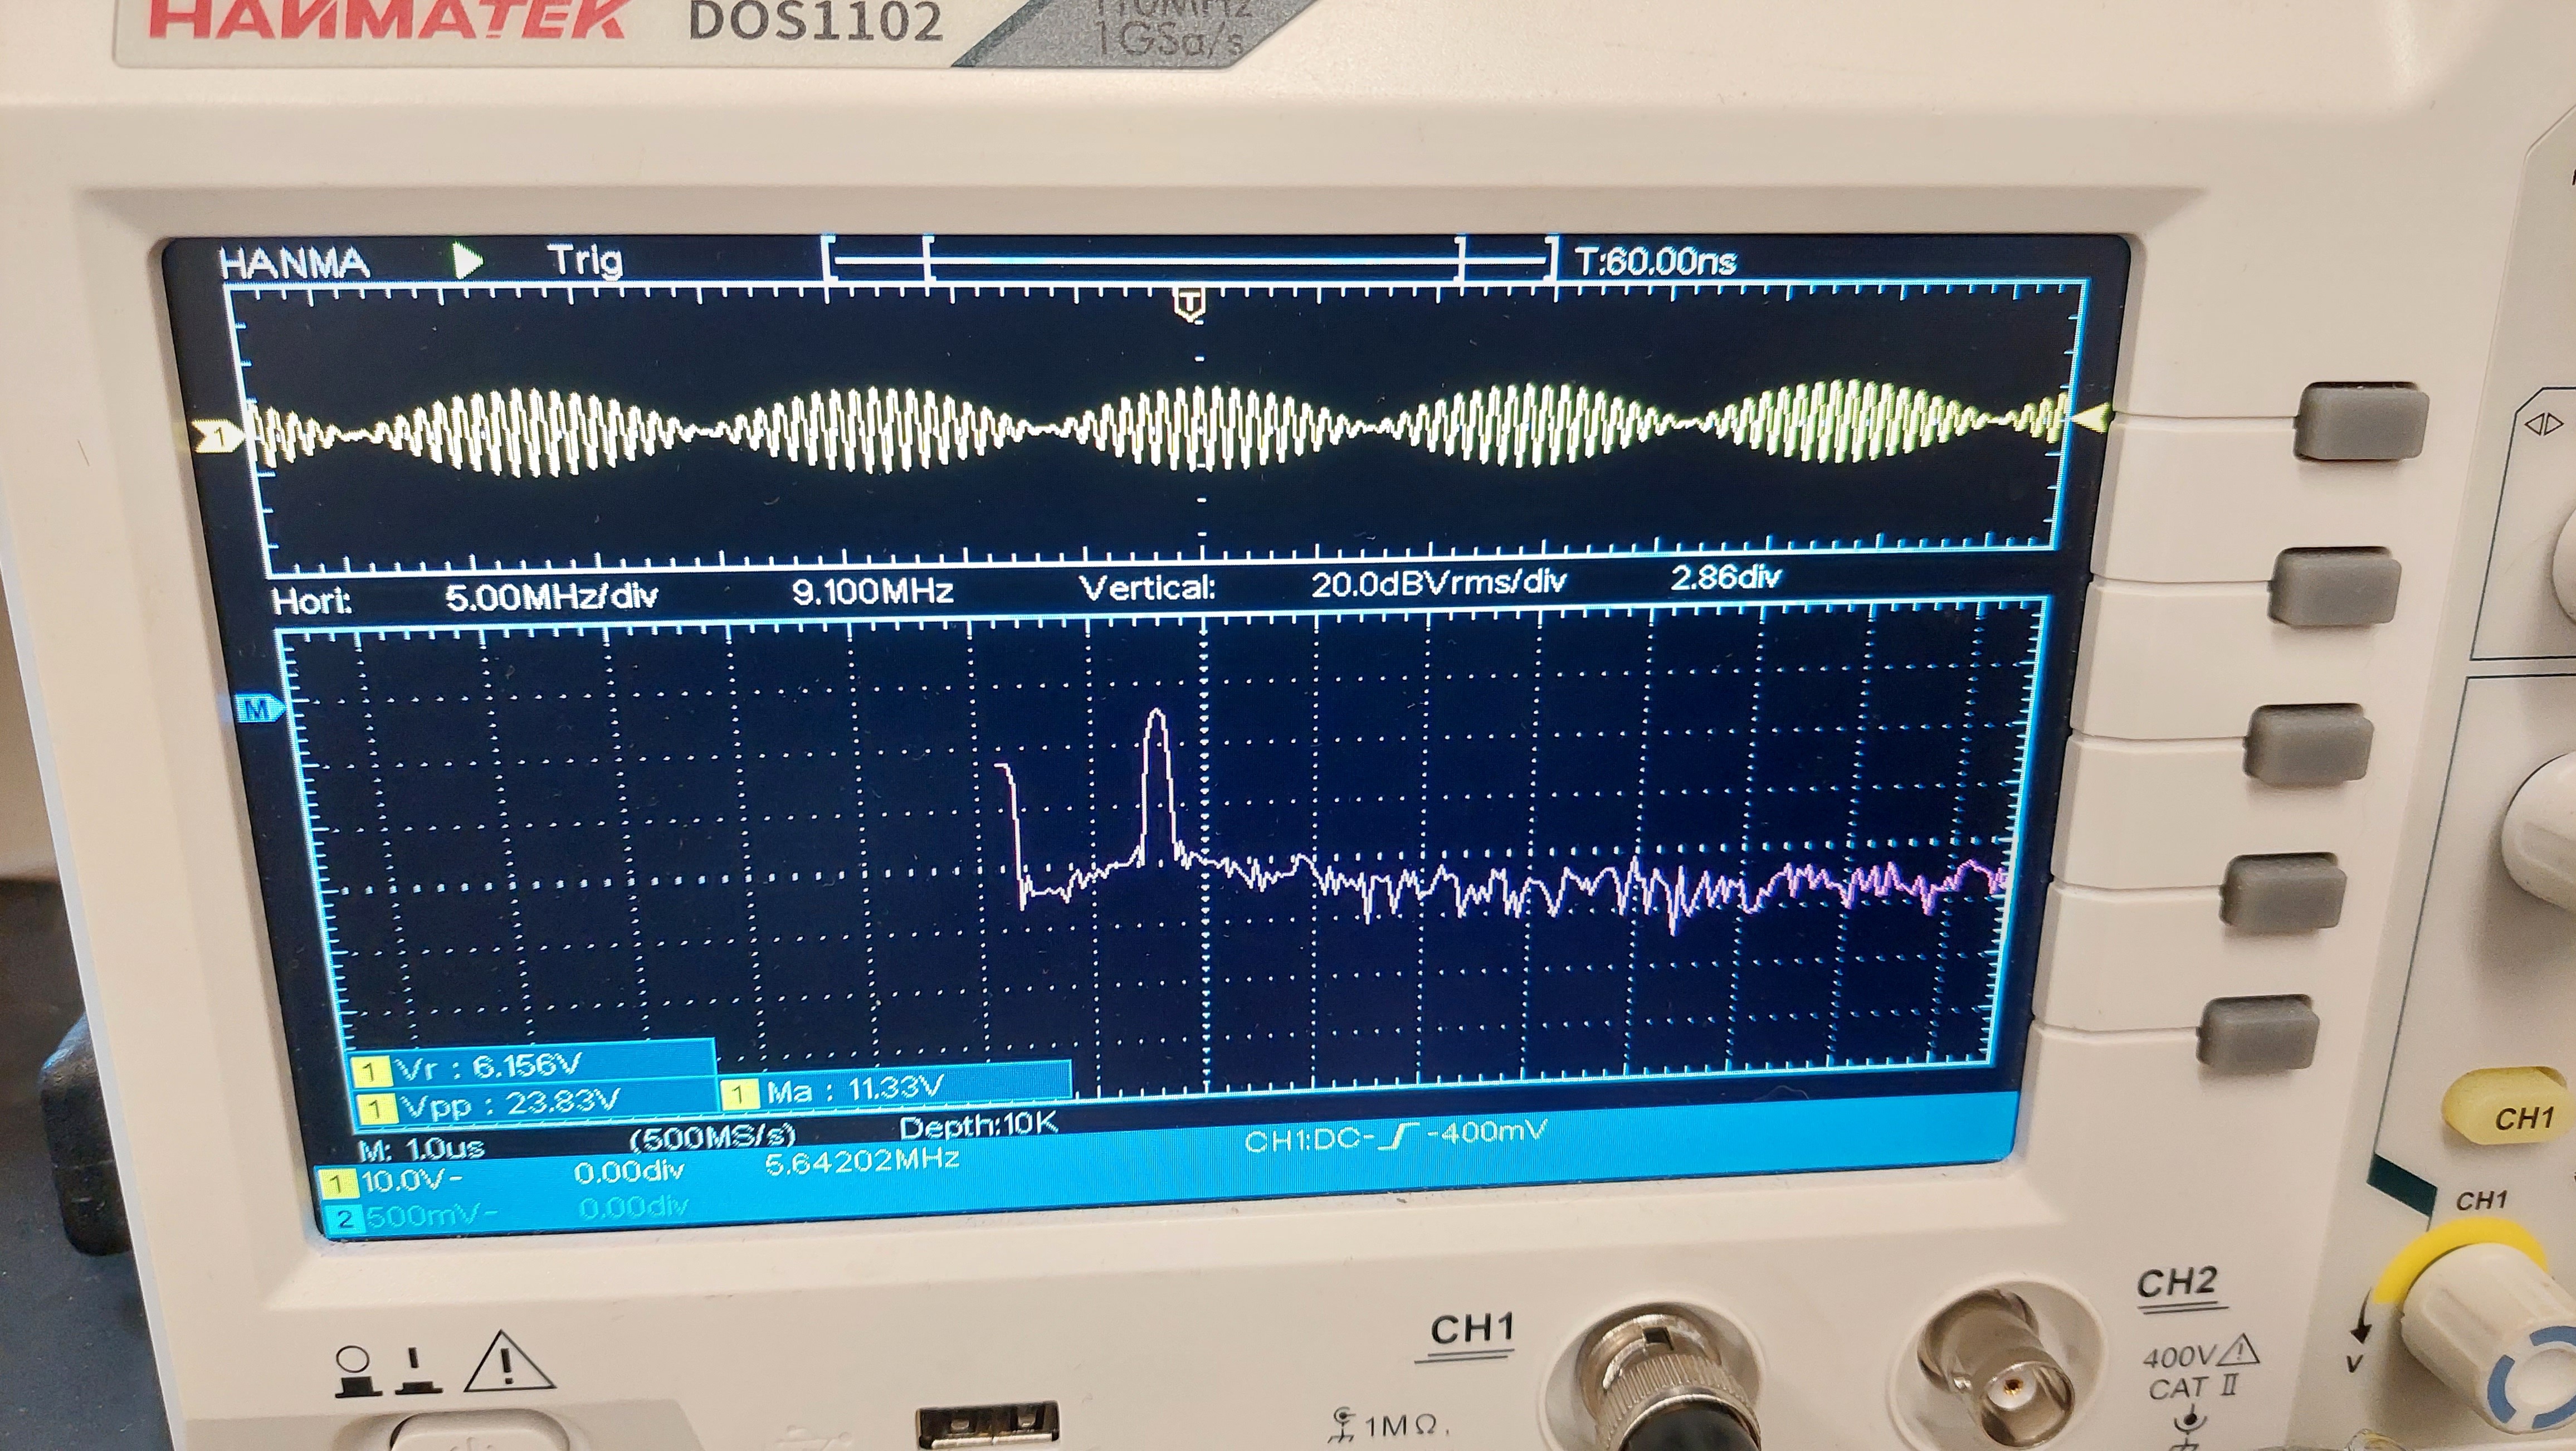 Oscilloscope showing an oddly amplitude-modulated sine wave at 6.552MHz